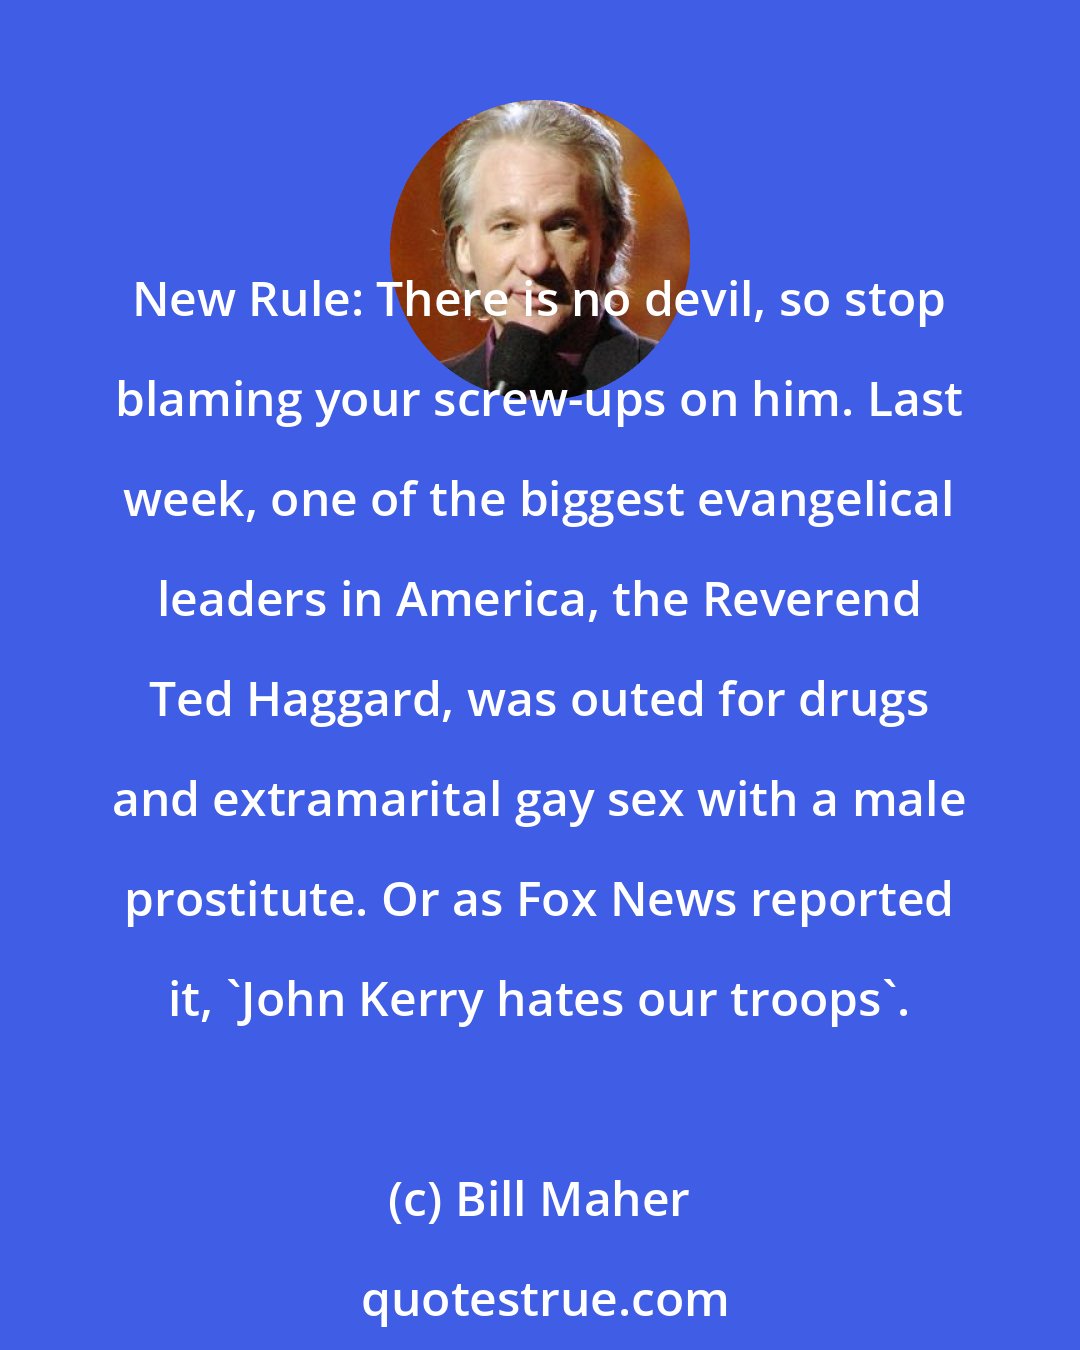 Bill Maher: New Rule: There is no devil, so stop blaming your screw-ups on him. Last week, one of the biggest evangelical leaders in America, the Reverend Ted Haggard, was outed for drugs and extramarital gay sex with a male prostitute. Or as Fox News reported it, 'John Kerry hates our troops'.